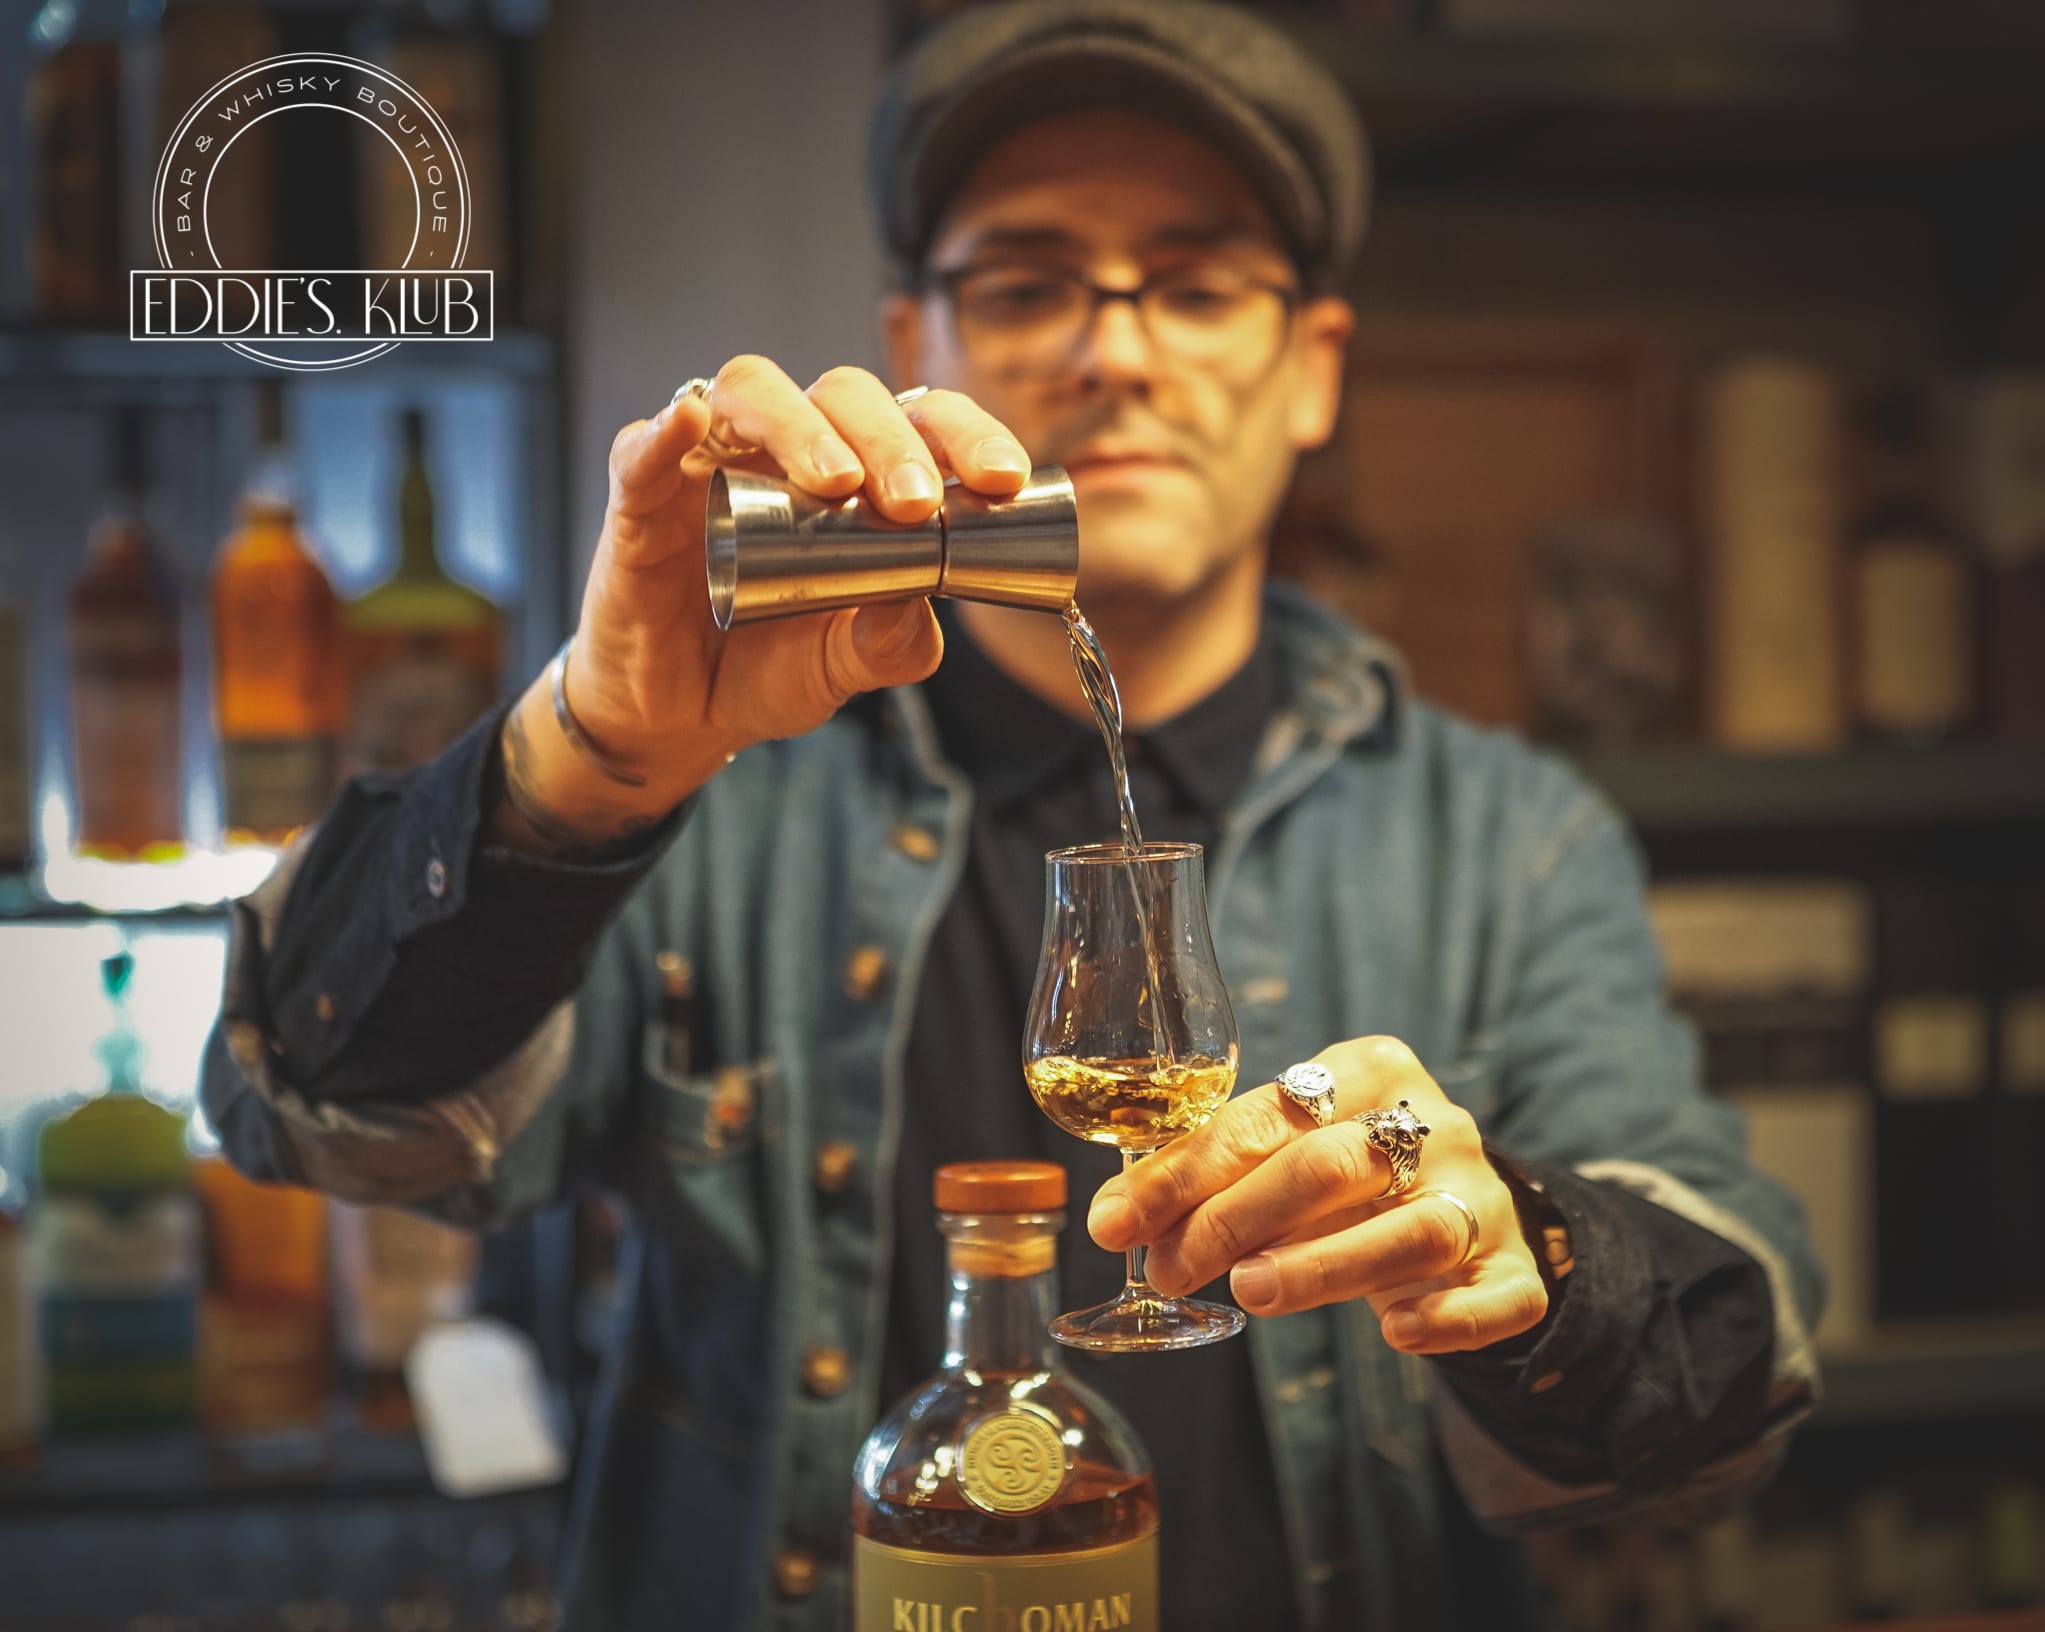 Eddie pouring whisky in a tasting glass